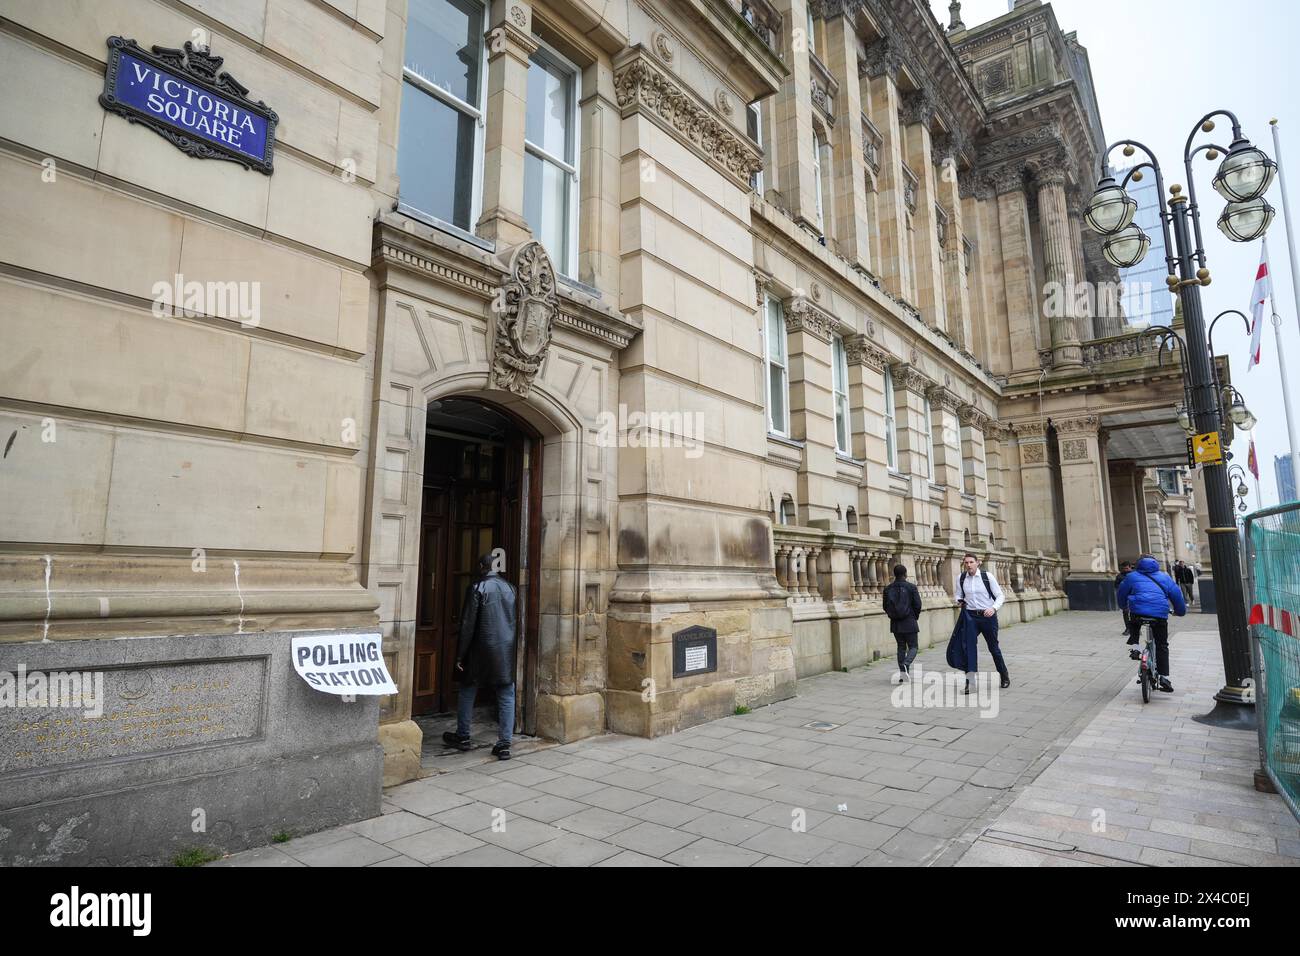 Birmingham city centre, May 2nd 2024 - A polling station at Birmingham City Council House in Victoria Square. People in Birmingham are voting for the Police and Crime Commissioner and the Mayor. Credit: Stop Press Media/Alamy Live News Stock Photo